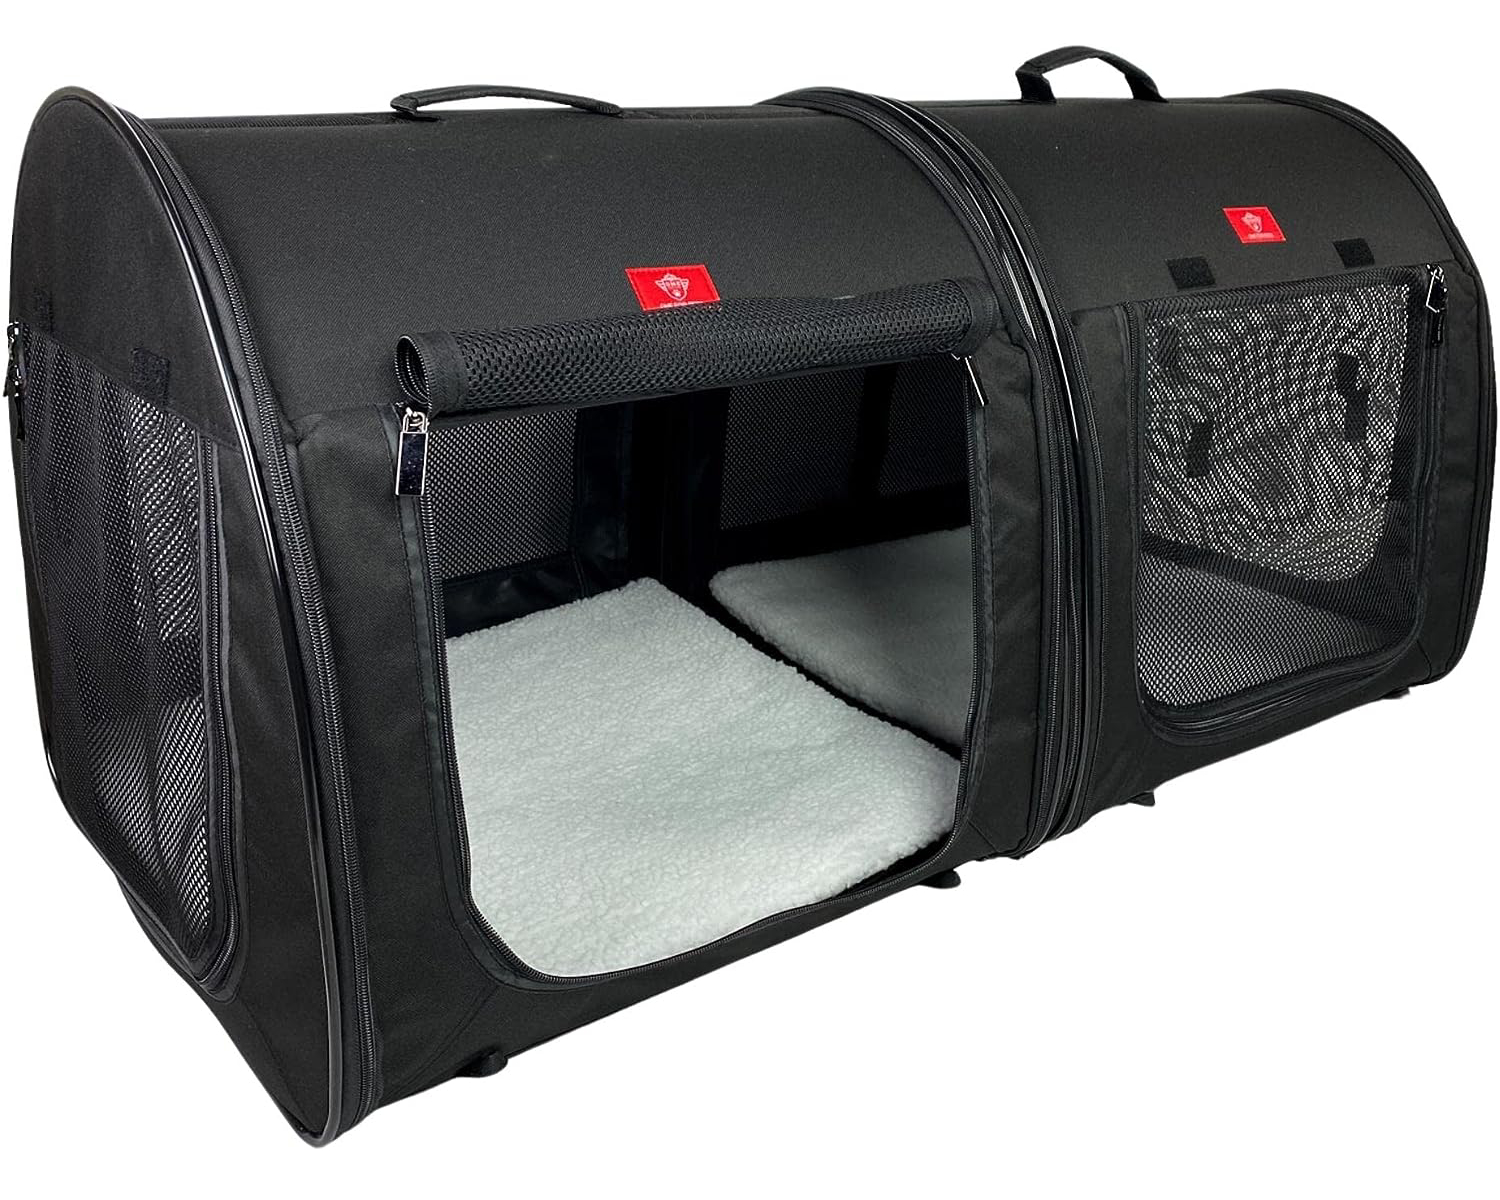 Portable 2-in-1 Double Pet Kennel_Shelter